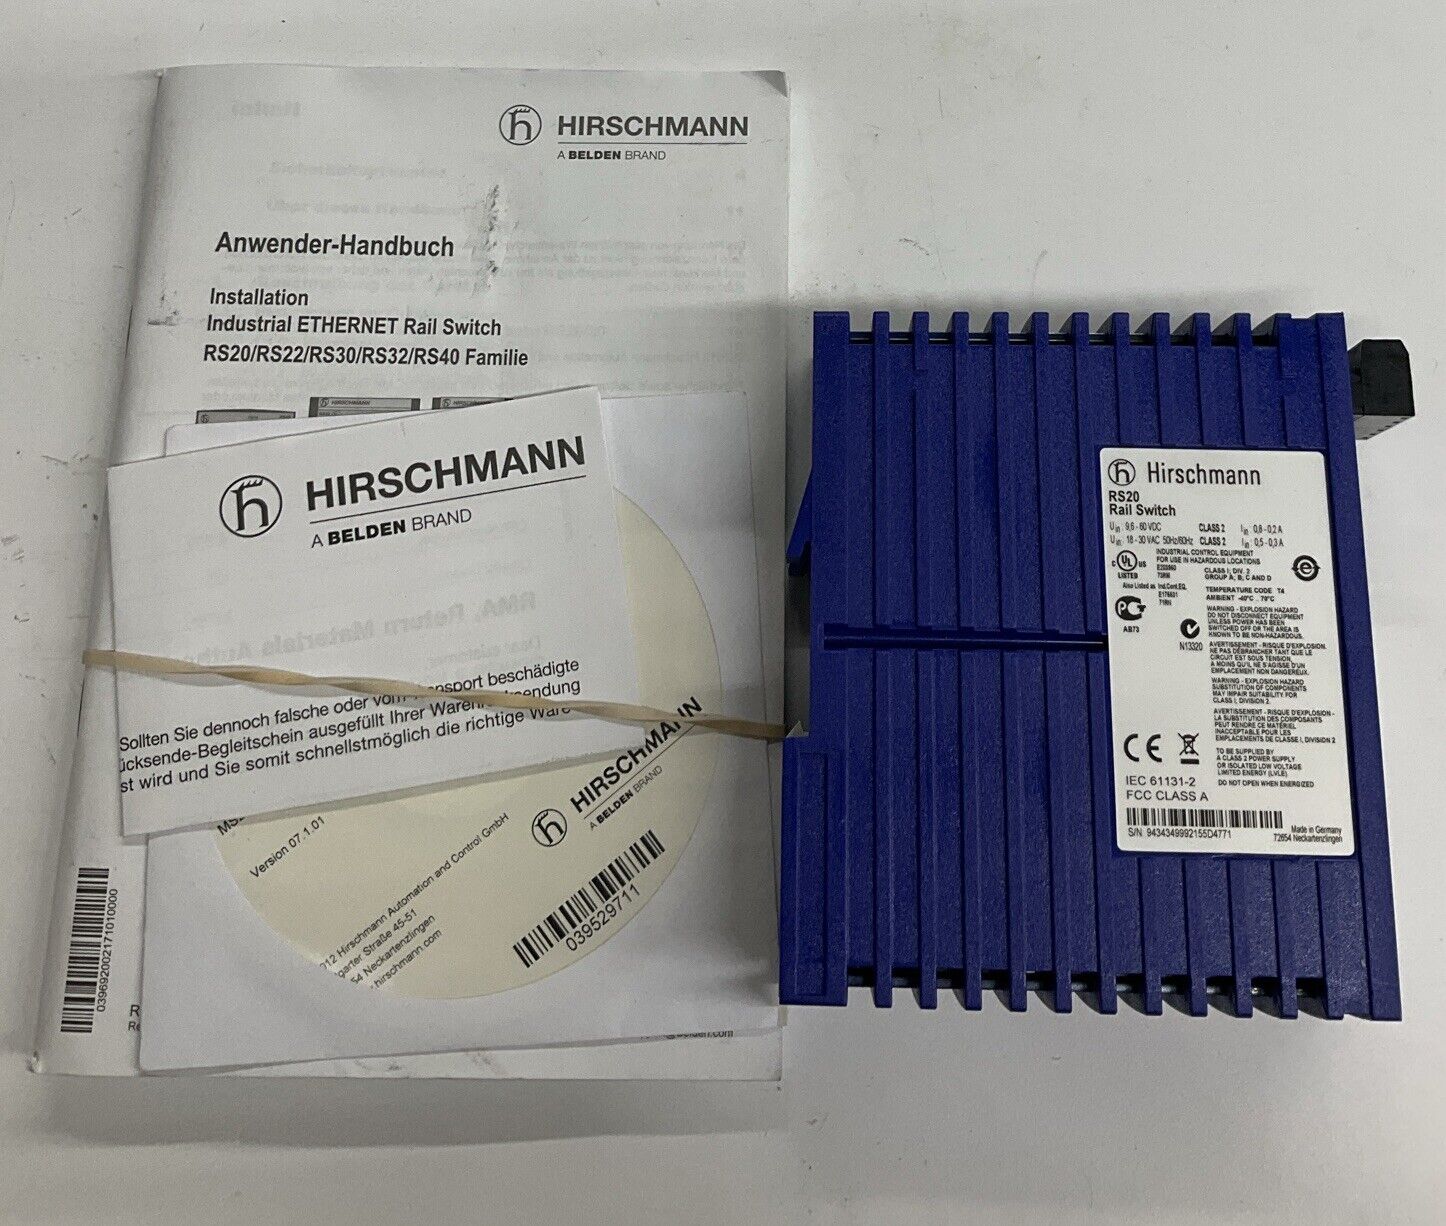 Hirschmann RS20 Rail Switch for use in Hazardous Conditions (CL397)